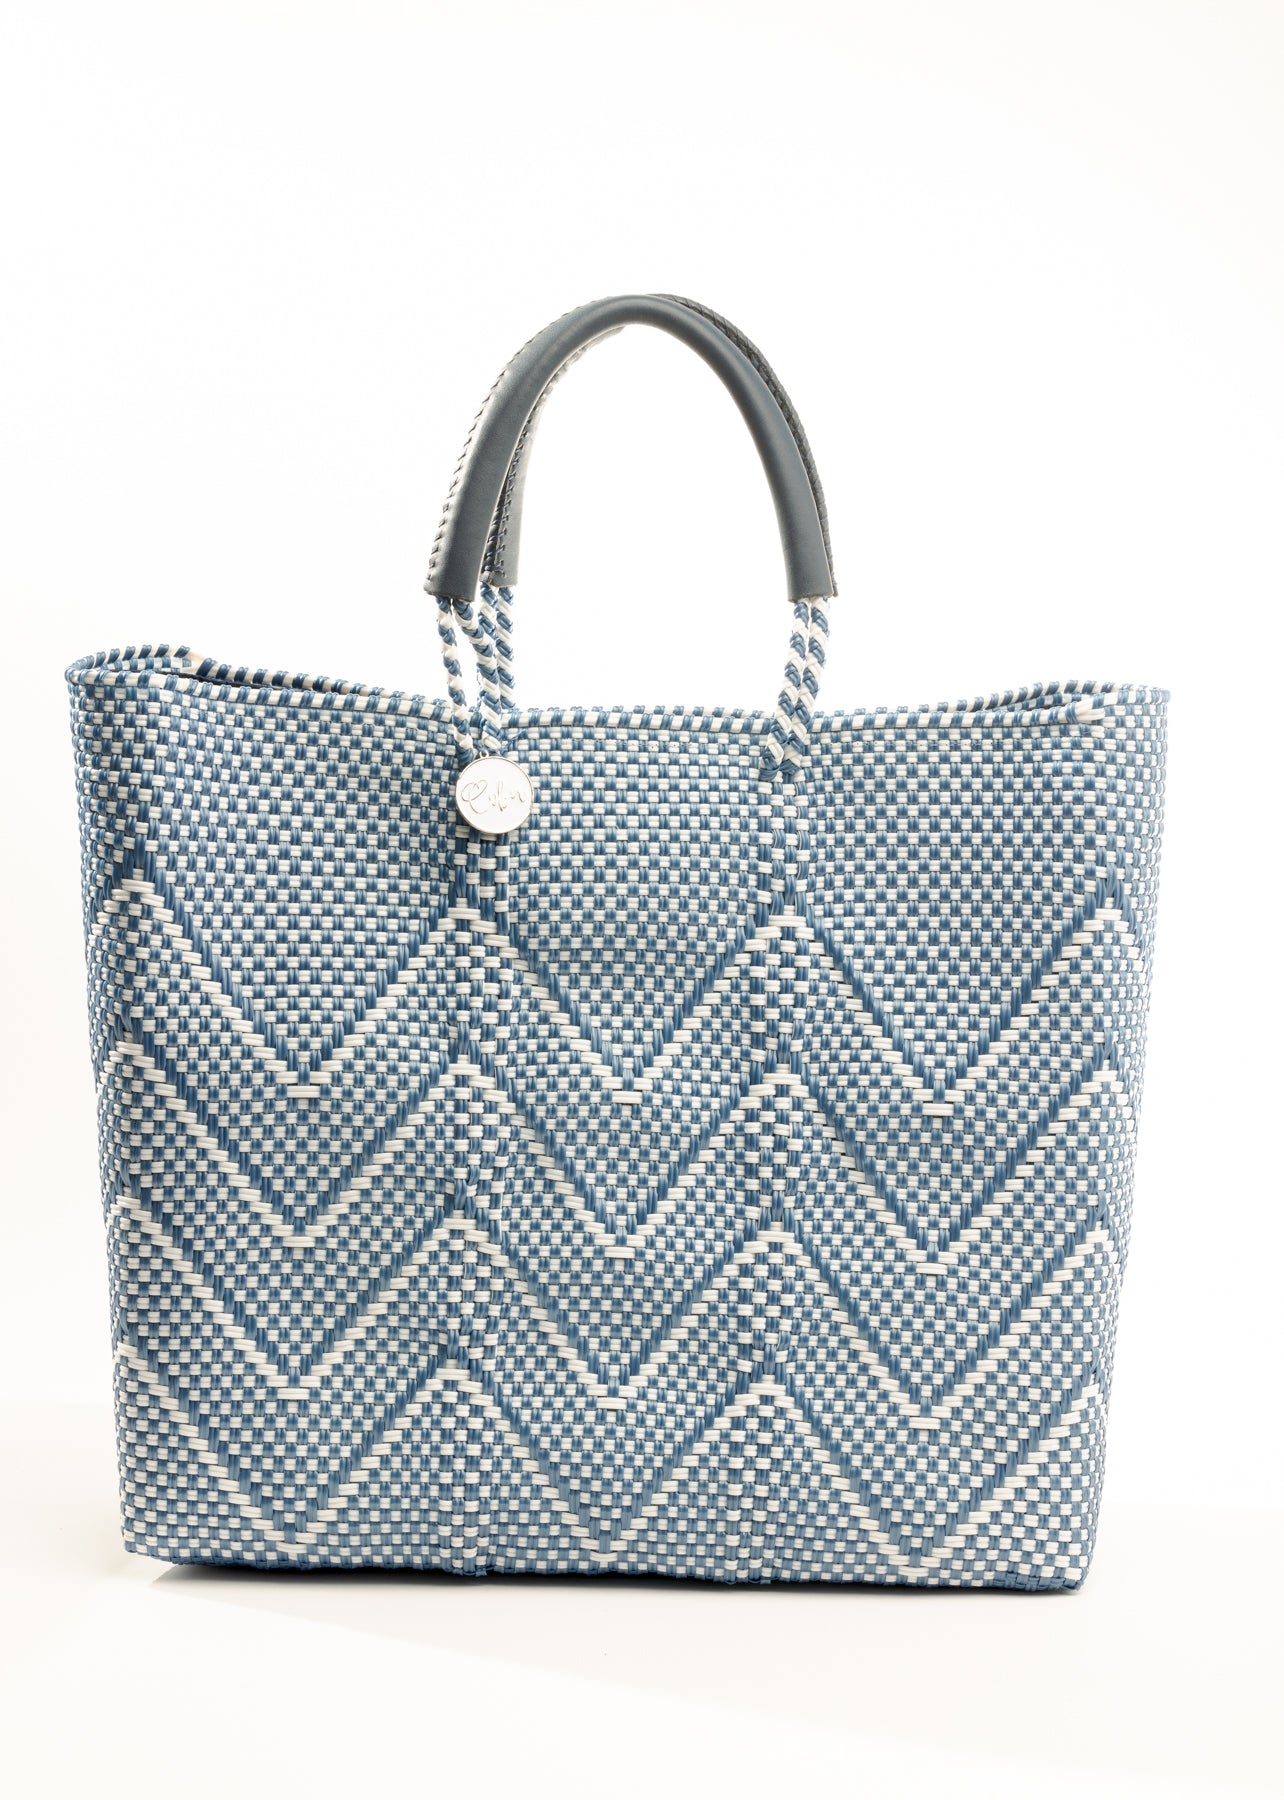 Blue and white chevron tote bag made from recycled plastics featuring a blue handle and silver Coba logo medallion